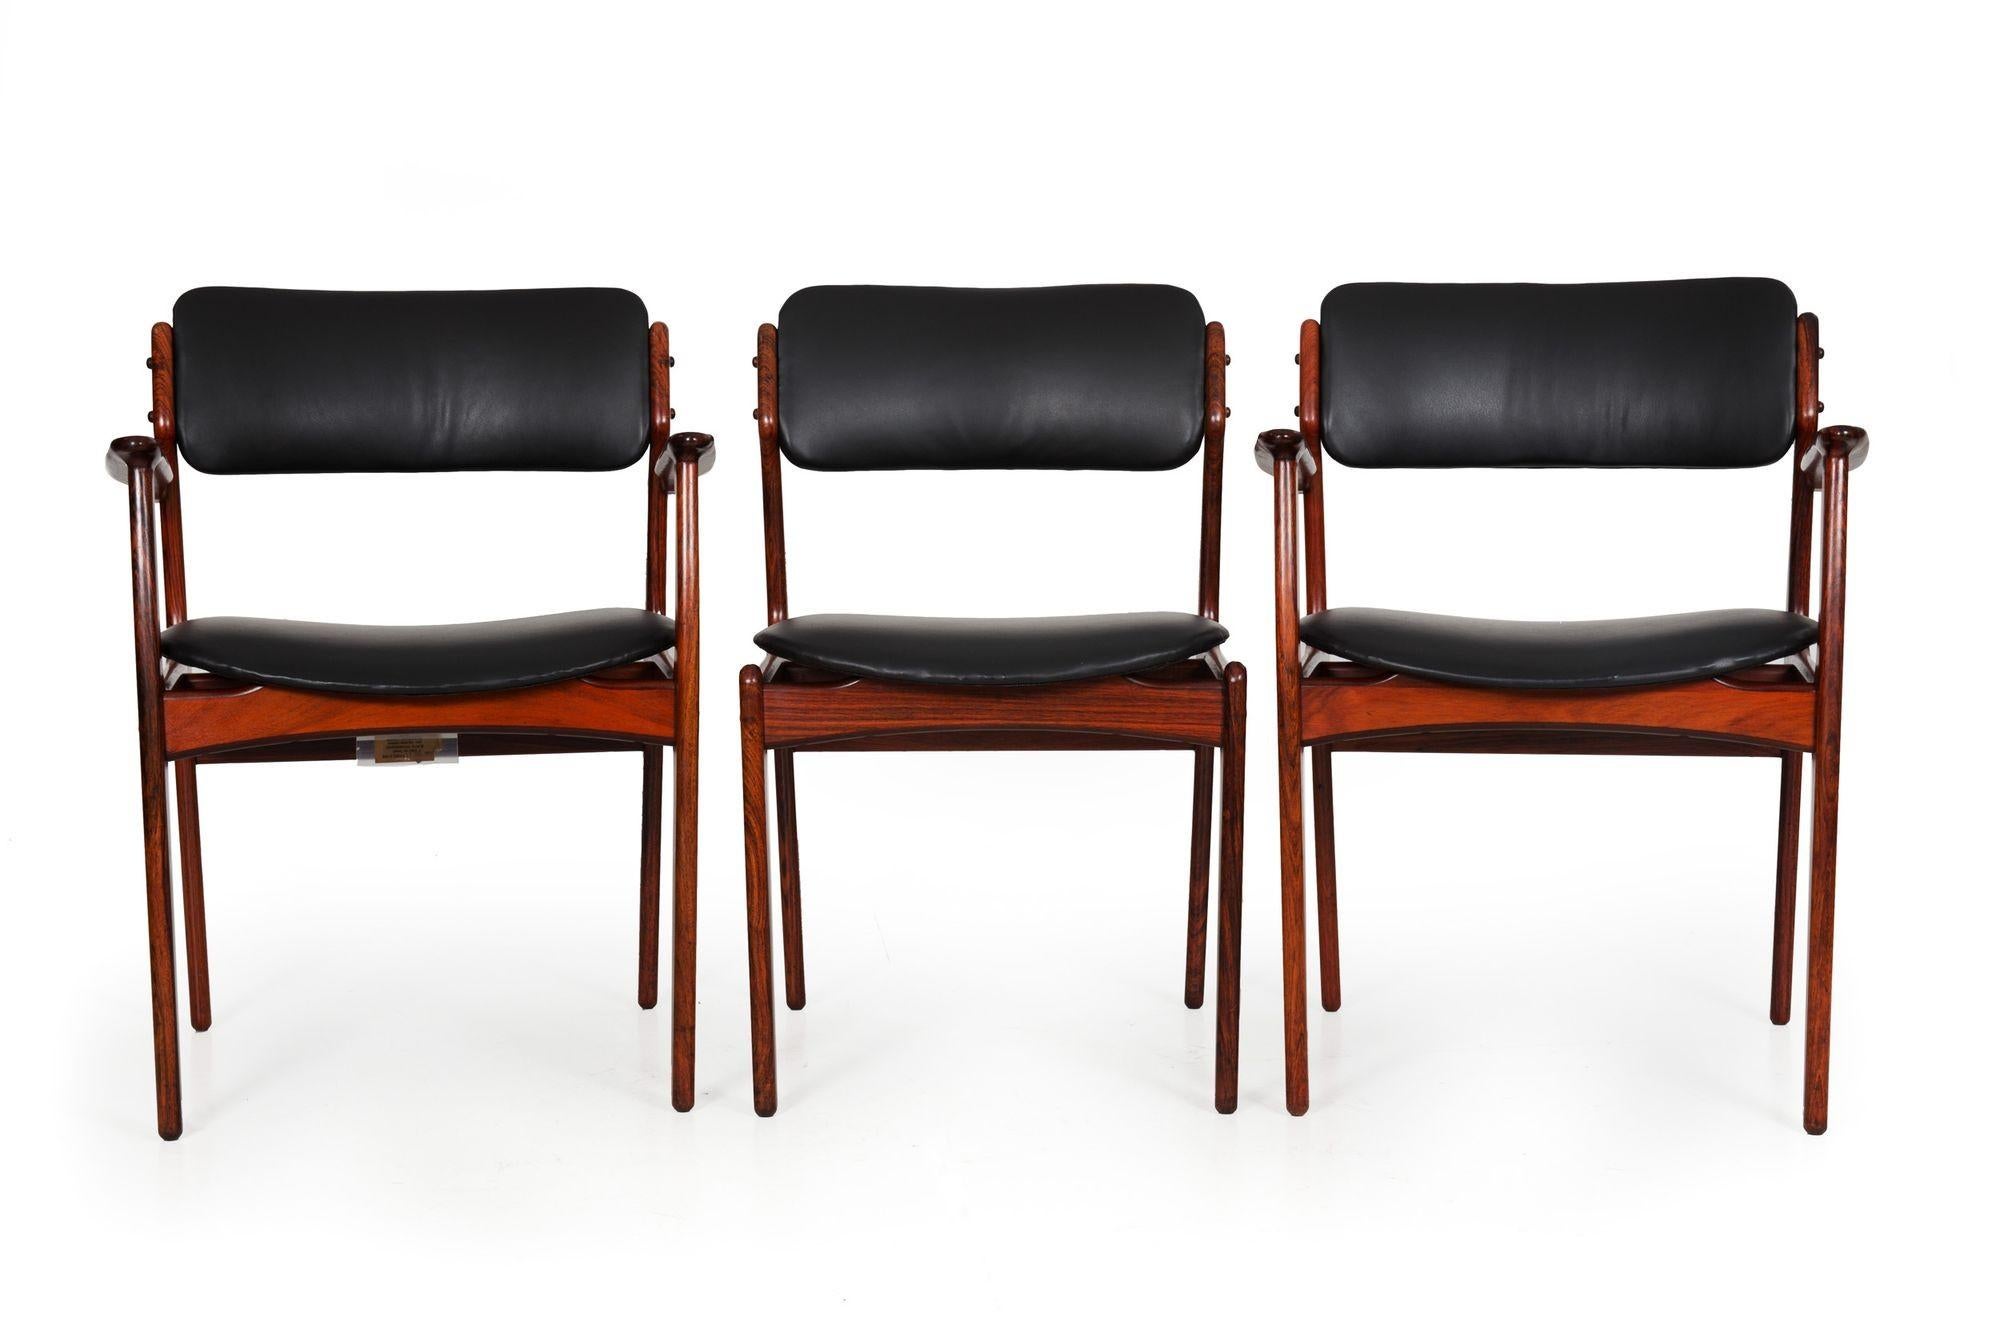 A very fine set of the model OD-49 and OD-50 by Erik Buch for O.D. Møbler, they are executed in the relatively rare and always incredibly beautiful rosewood surfaces. All chairs have been expertly refinished while maintaining the underlying patina